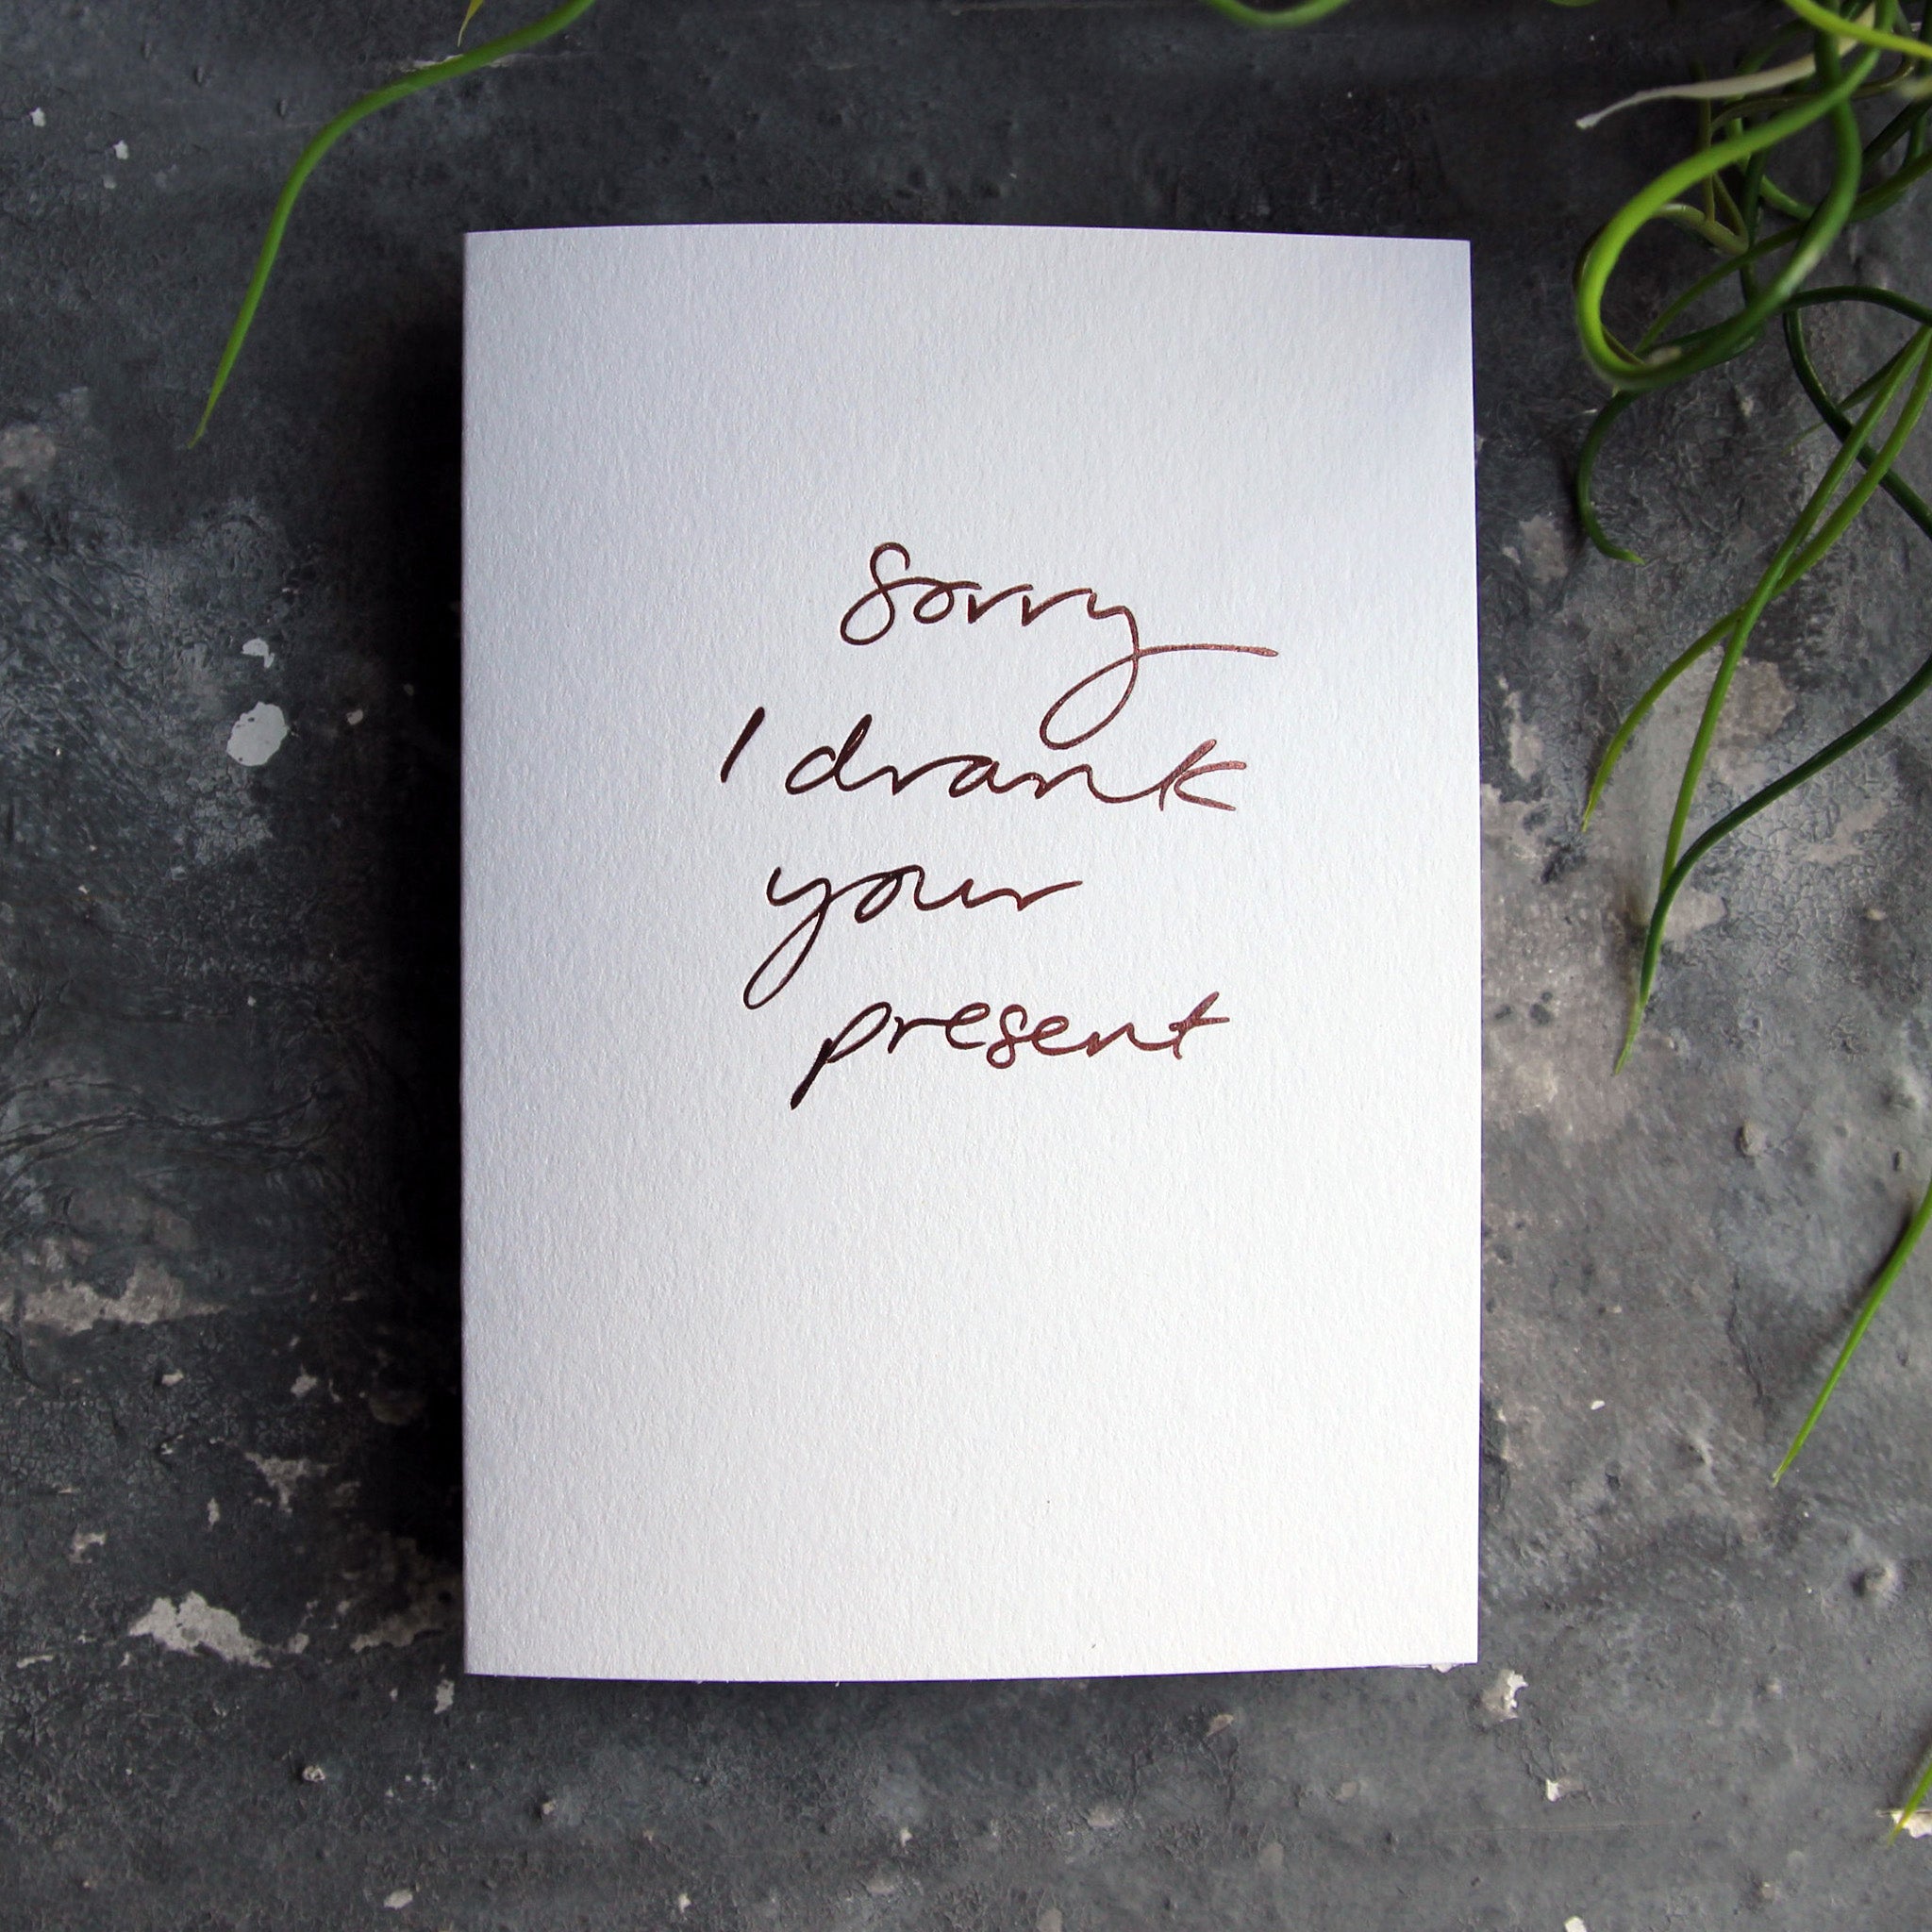 Luxury white greetings card with "Sorry I Drank Your Present" handwritten in the front and hand printed in rose gold foil on a grey background with some green plant leaves at the side.